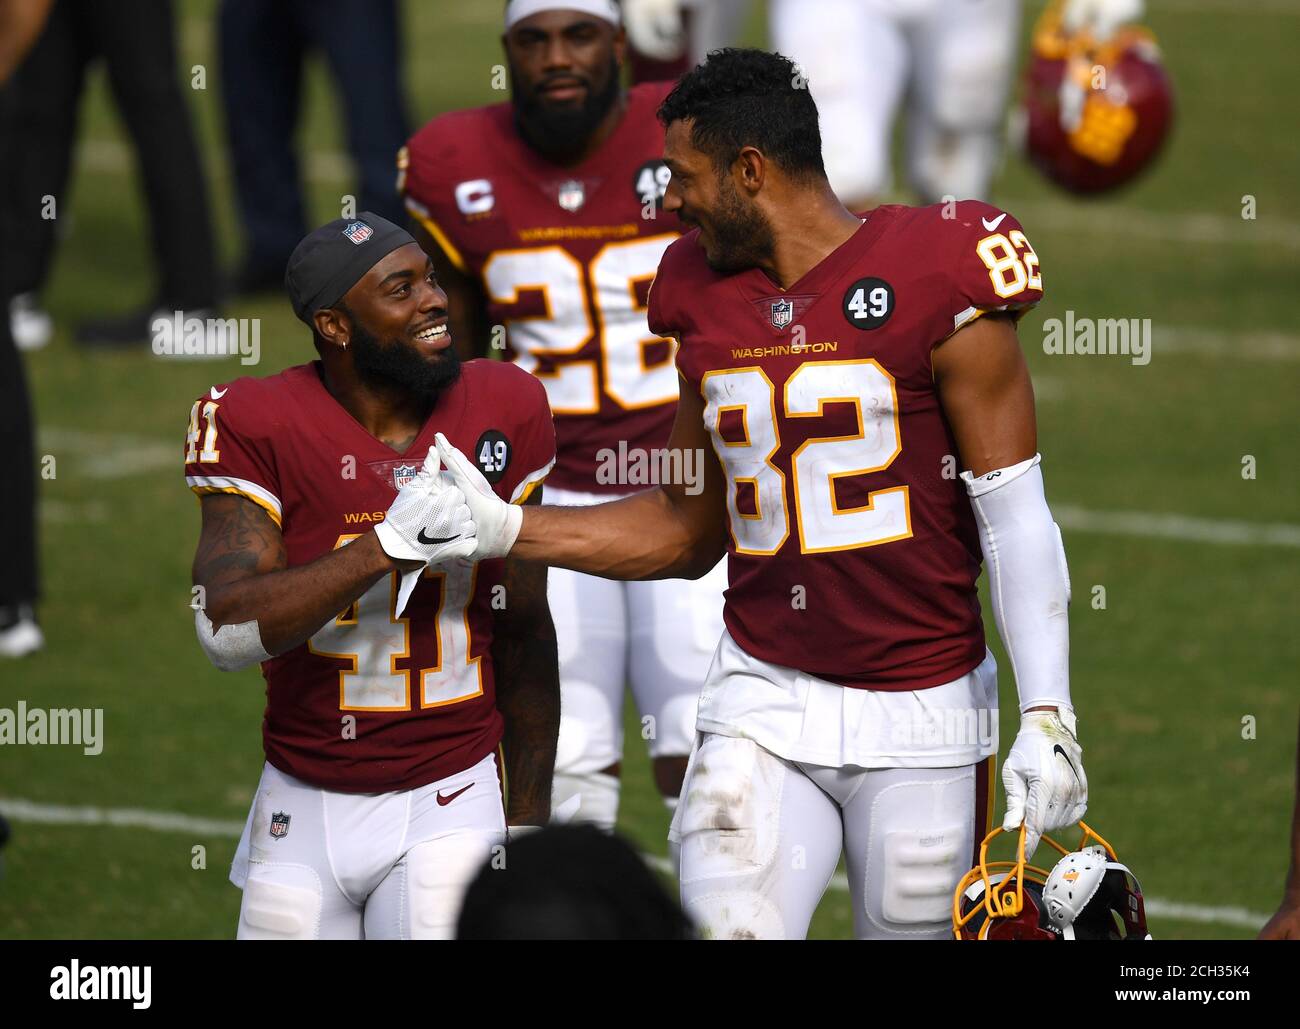 Landover, United State. 13th Sep, 2020. Washington Football Team running back J.D. McKissic (41) celebrates with teammate tight end Logan Thomas (82) after the Football Team defeated the Philadelphia Eagles 27-17, at FedEx Field in Landover, Maryland on September 13, 2020. Photo by Kevin Dietsch/UPI Credit: UPI/Alamy Live News Stock Photo